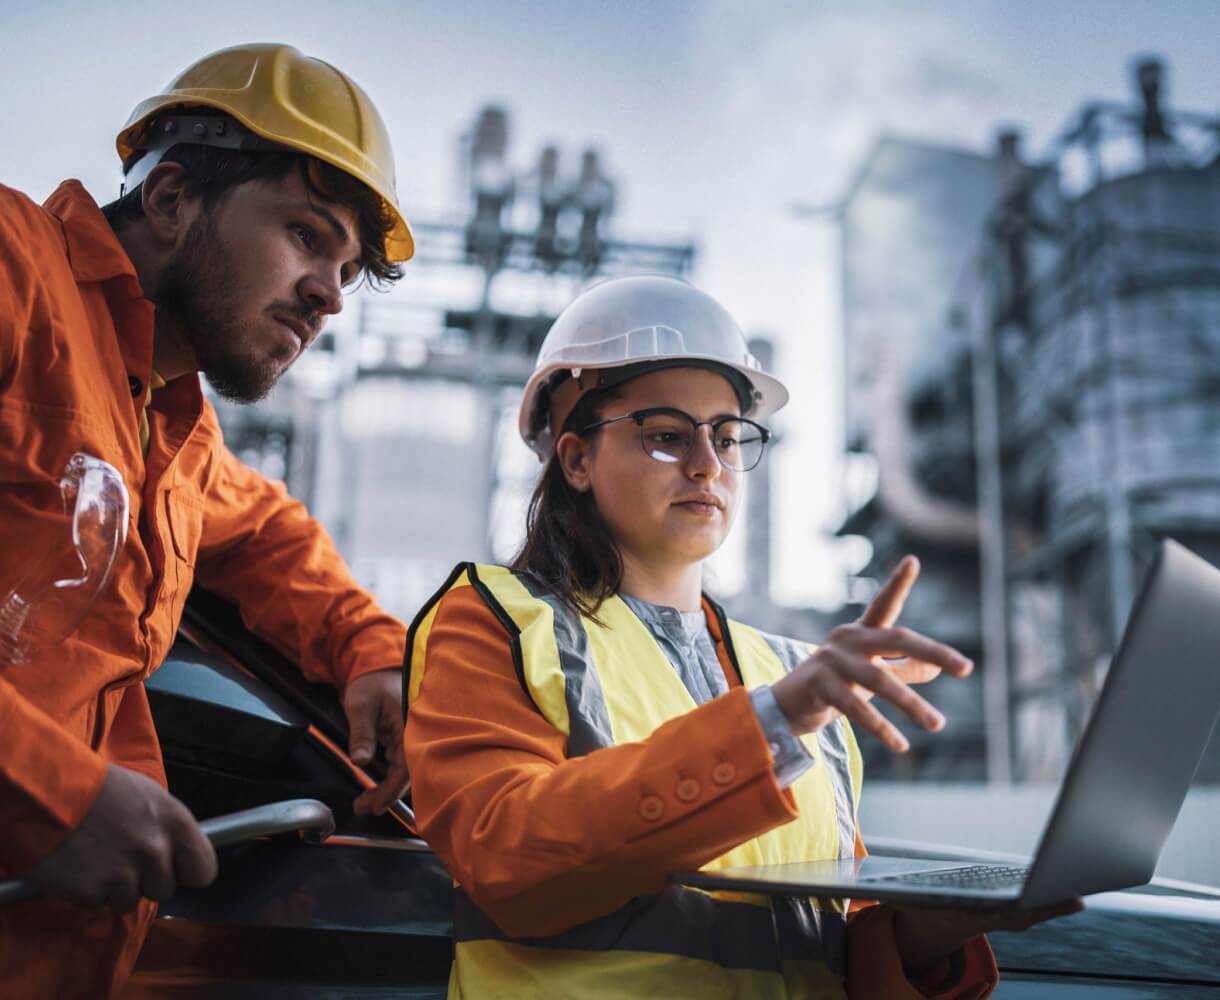 Two workers in reflective vests consult a laptop at an oil refinery, discussing operational data.